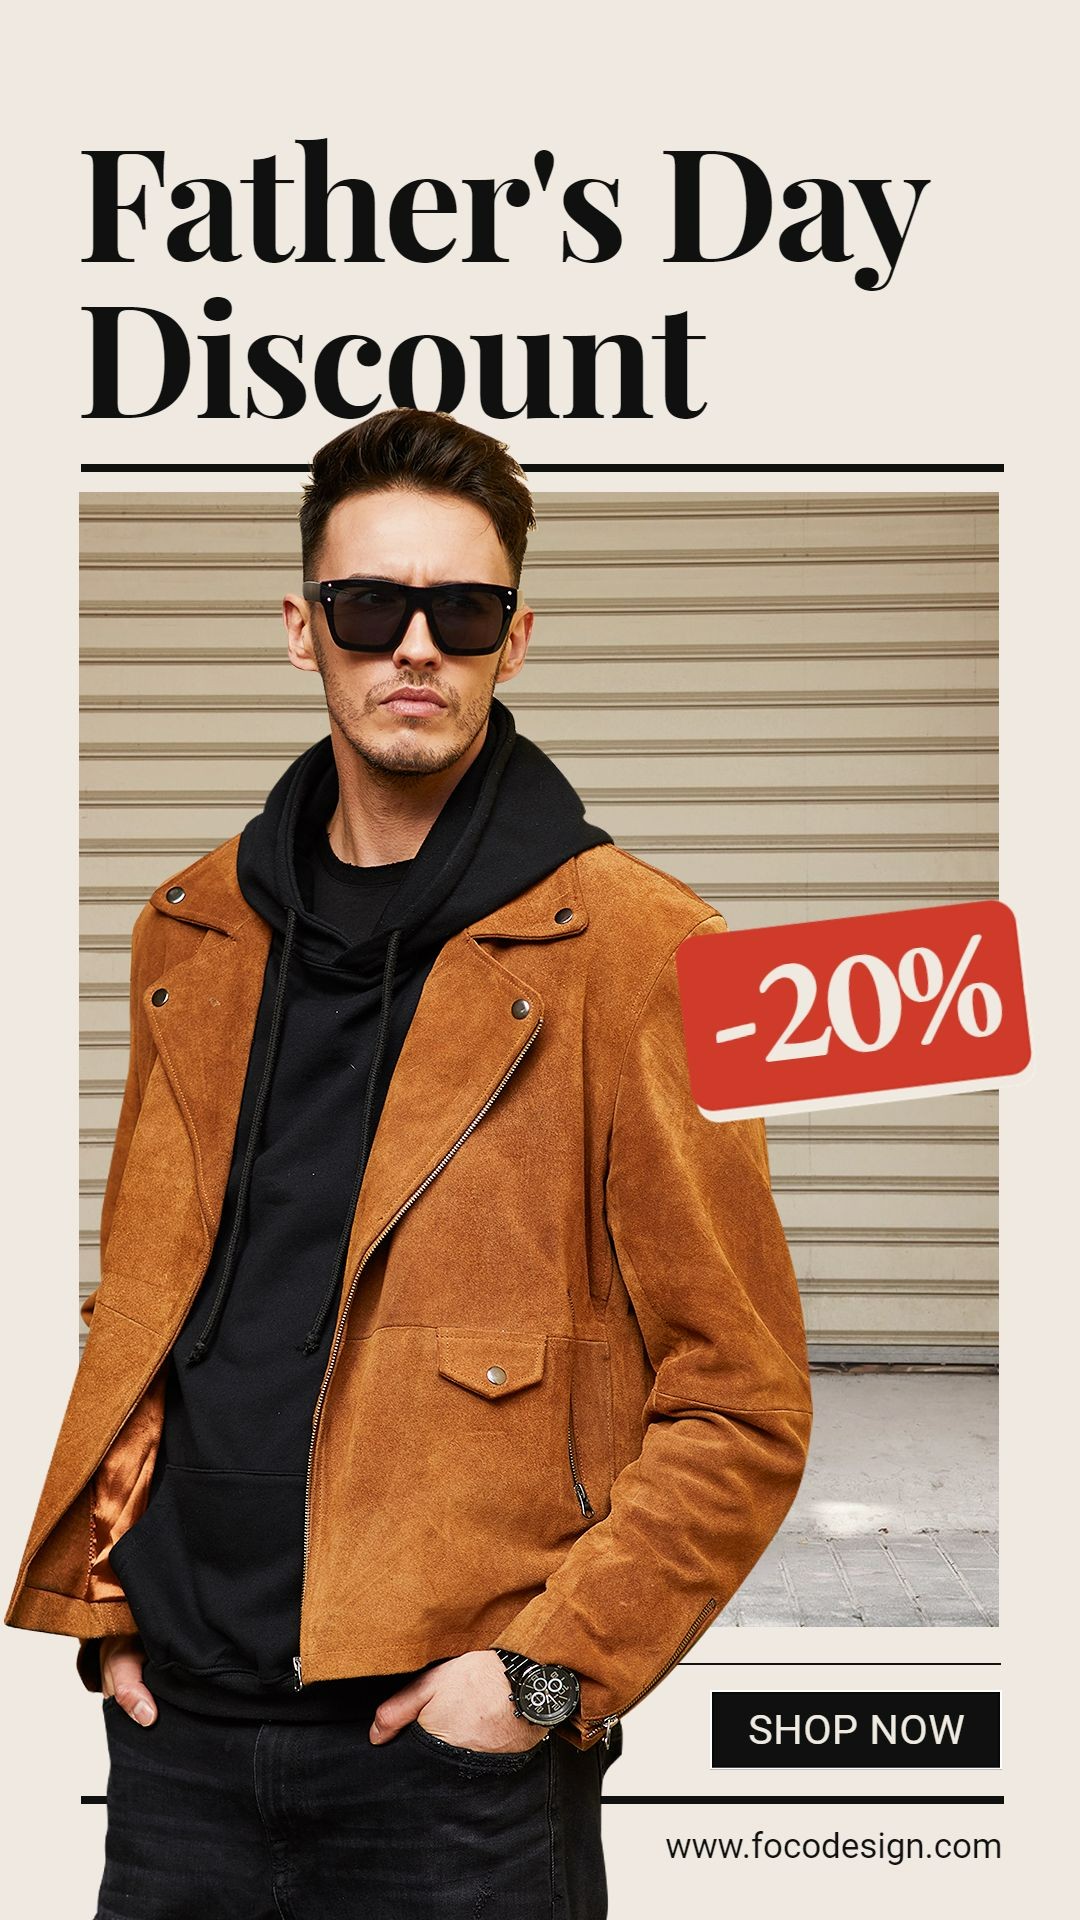 Sunglass Soat Man Father's Day Men's Clothing Fashion Discount Sale Promo Ecommerce Story预览效果